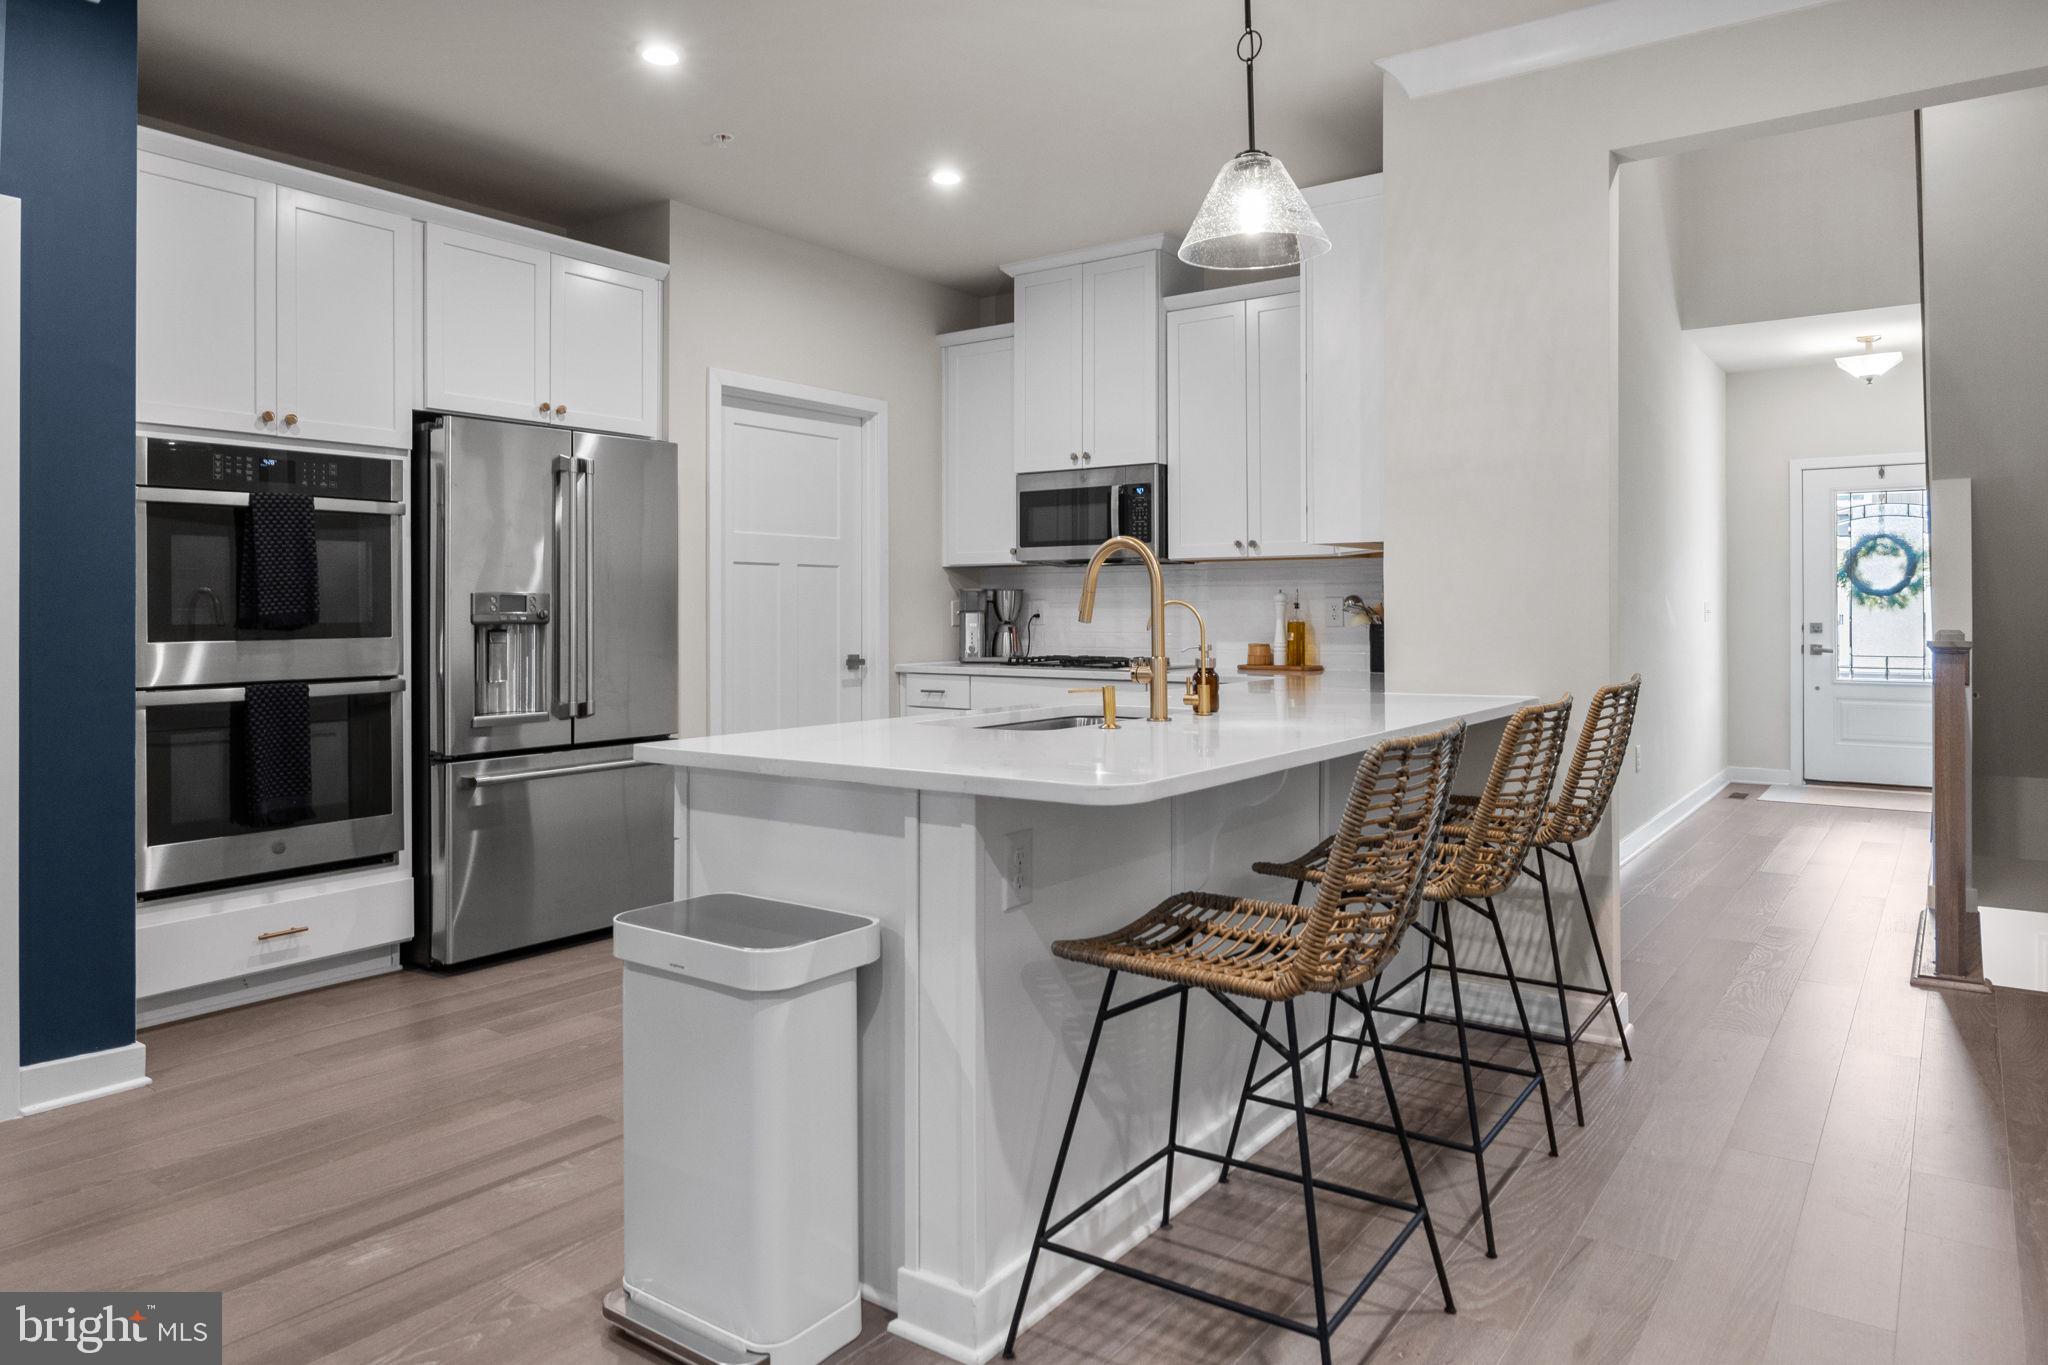 a kitchen with stainless steel appliances kitchen island granite countertop a refrigerator a sink dishwasher a stove and a oven with wooden floor